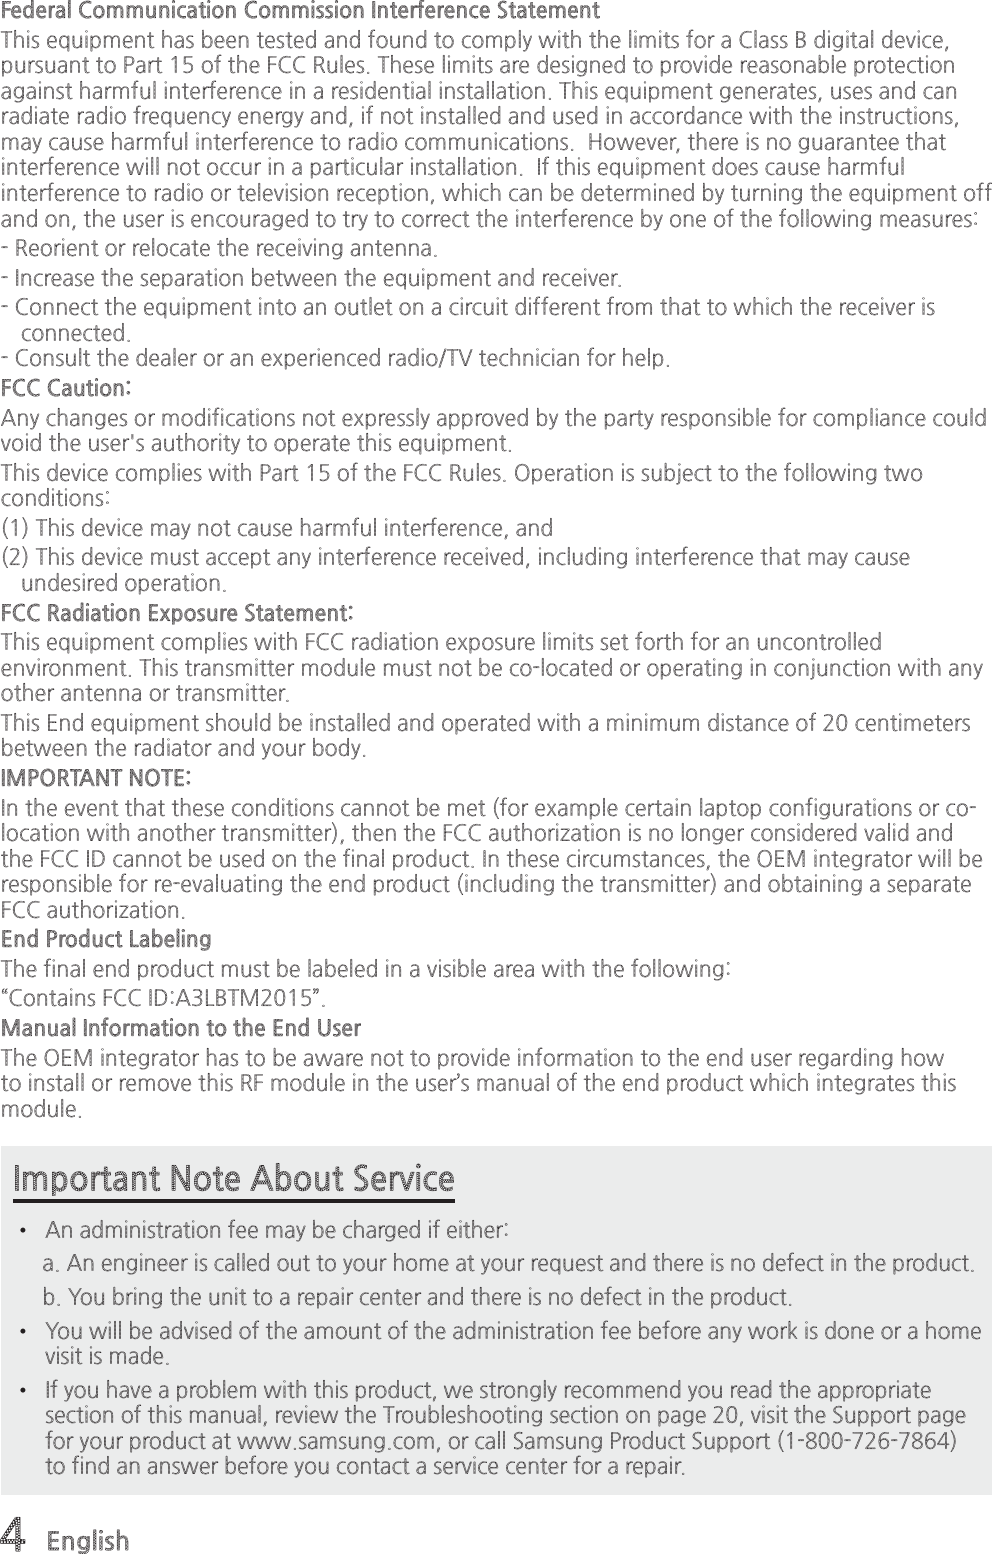 4 EnglishImportant Note About Service•  An administration fee may be charged if either:     a. An engineer is called out to your home at your request and there is no defect in the product.         b. You bring the unit to a repair center and there is no defect in the product. •  You will be advised of the amount of the administration fee before any work is done or a home visit is made. •  If you have a problem with this product, we strongly recommend you read the appropriate section of this manual, review the Troubleshooting section on page 20, visit the Support page for your product at www.samsung.com, or call Samsung Product Support (1-800-726-7864) to find an answer before you contact a service center for a repair.Federal Communication Commission Interference Statement This equipment has been tested and found to comply with the limits for a Class B digital device, pursuant to Part 15 of the FCC Rules. These limits are designed to provide reasonable protection against harmful interference in a residential installation. This equipment generates, uses and can radiate radio frequency energy and, if not installed and used in accordance with the instructions, may cause harmful interference to radio communications.  However, there is no guarantee that interference will not occur in a particular installation.  If this equipment does cause harmful interference to radio or television reception, which can be determined by turning the equipment off and on, the user is encouraged to try to correct the interference by one of the following measures: - Reorient or relocate the receiving antenna. - Increase the separation between the equipment and receiver. - Connect the equipment into an outlet on a circuit different from that to which the receiver is connected. - Consult the dealer or an experienced radio/TV technician for help. FCC Caution: Any changes or modifications not expressly approved by the party responsible for compliance could void the user&apos;s authority to operate this equipment. This device complies with Part 15 of the FCC Rules. Operation is subject to the following two conditions: (1) This device may not cause harmful interference, and(2) This device must accept any interference received, including interference that may cause undesired operation. FCC Radiation Exposure Statement:  This equipment complies with FCC radiation exposure limits set forth for an uncontrolled environment. This transmitter module must not be co-located or operating in conjunction with any other antenna or transmitter.  This End equipment should be installed and operated with a minimum distance of 20 centimeters between the radiator and your body.IMPORTANT NOTE: In the event that these conditions cannot be met (for example certain laptop configurations or co-location with another transmitter), then the FCC authorization is no longer considered valid and the FCC ID cannot be used on the final product. In these circumstances, the OEM integrator will be responsible for re-evaluating the end product (including the transmitter) and obtaining a separate FCC authorization.  End Product Labeling  The final end product must be labeled in a visible area with the following:     “Contains FCC ID:A3LBTM2015”.    Manual Information to the End User  The OEM integrator has to be aware not to provide information to the end user regarding how to install or remove this RF module in the user’s manual of the end product which integrates this module.  